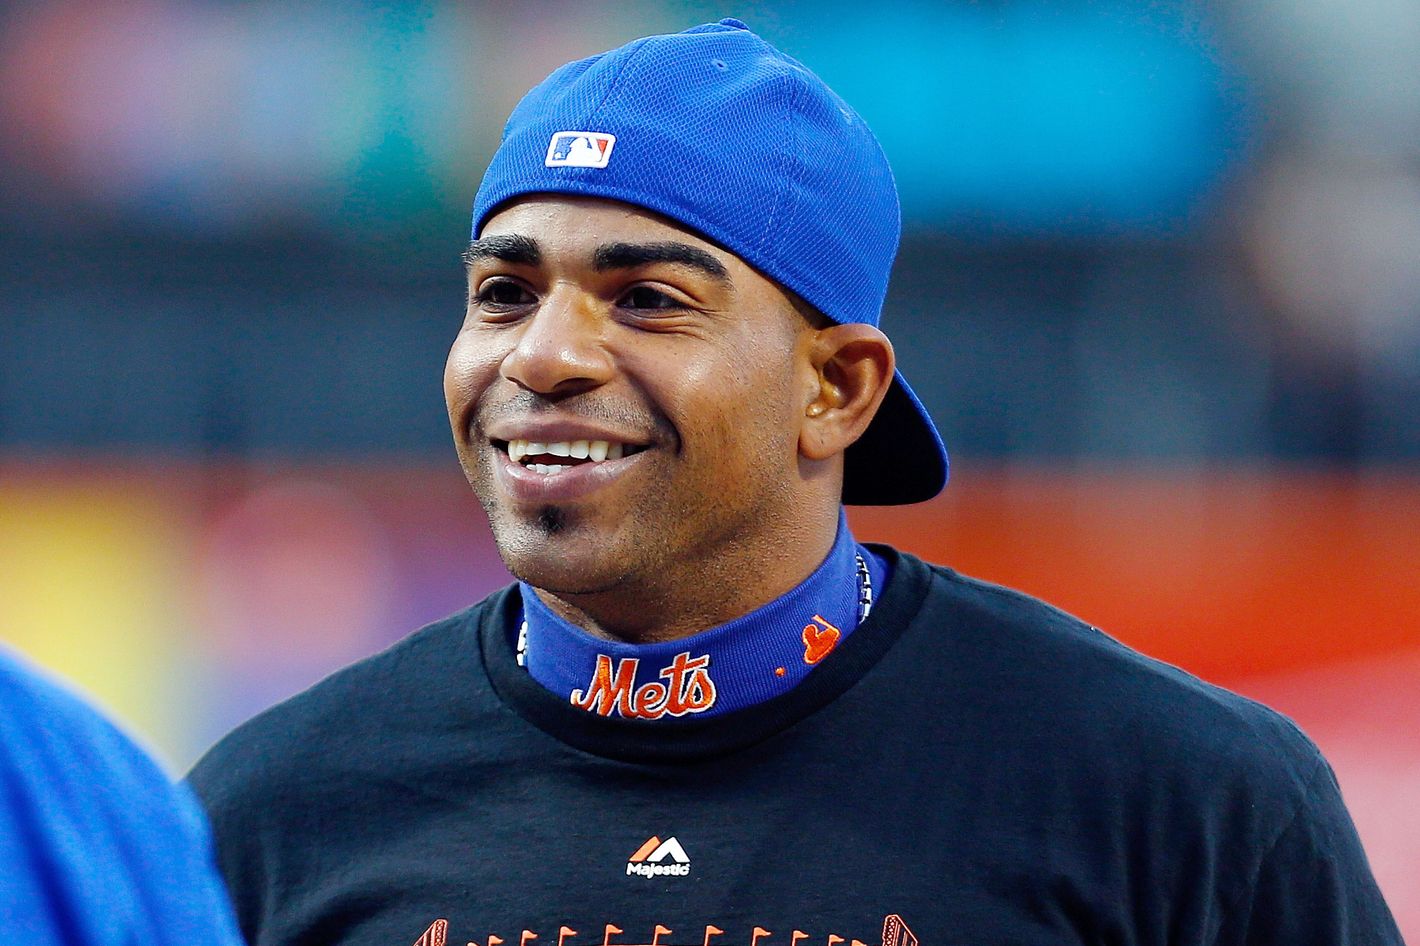 Yoenis Cespedes on arriving at Mets camp: 'It's just coming home' 